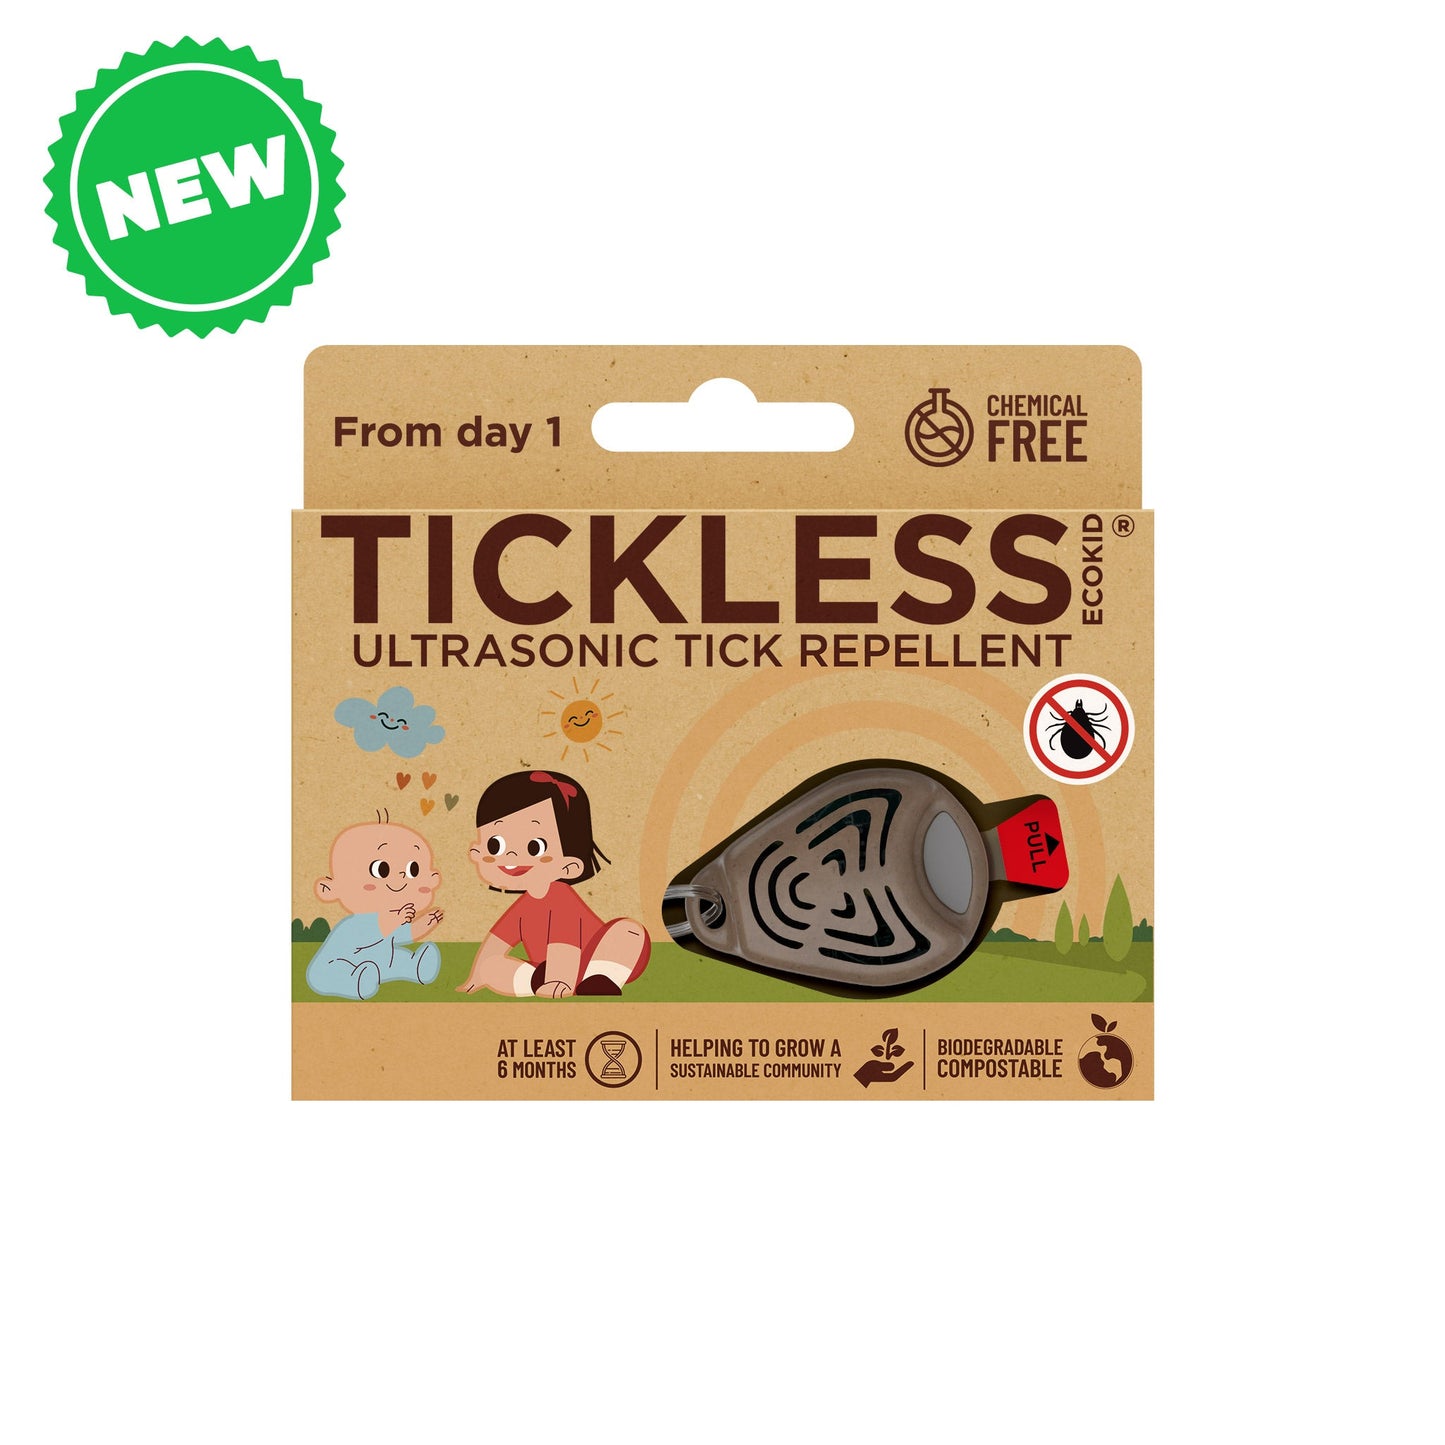 TicklessUSA EcoKid Brown Tickless EcoKid Chemical-Free Tick Repellent for Babies and Kids sonicguard SonicGuard sonicguardusa SonicGuardUSA tick repeller ultrasonic Tickless TicklessUSA tick and flea repellent safe